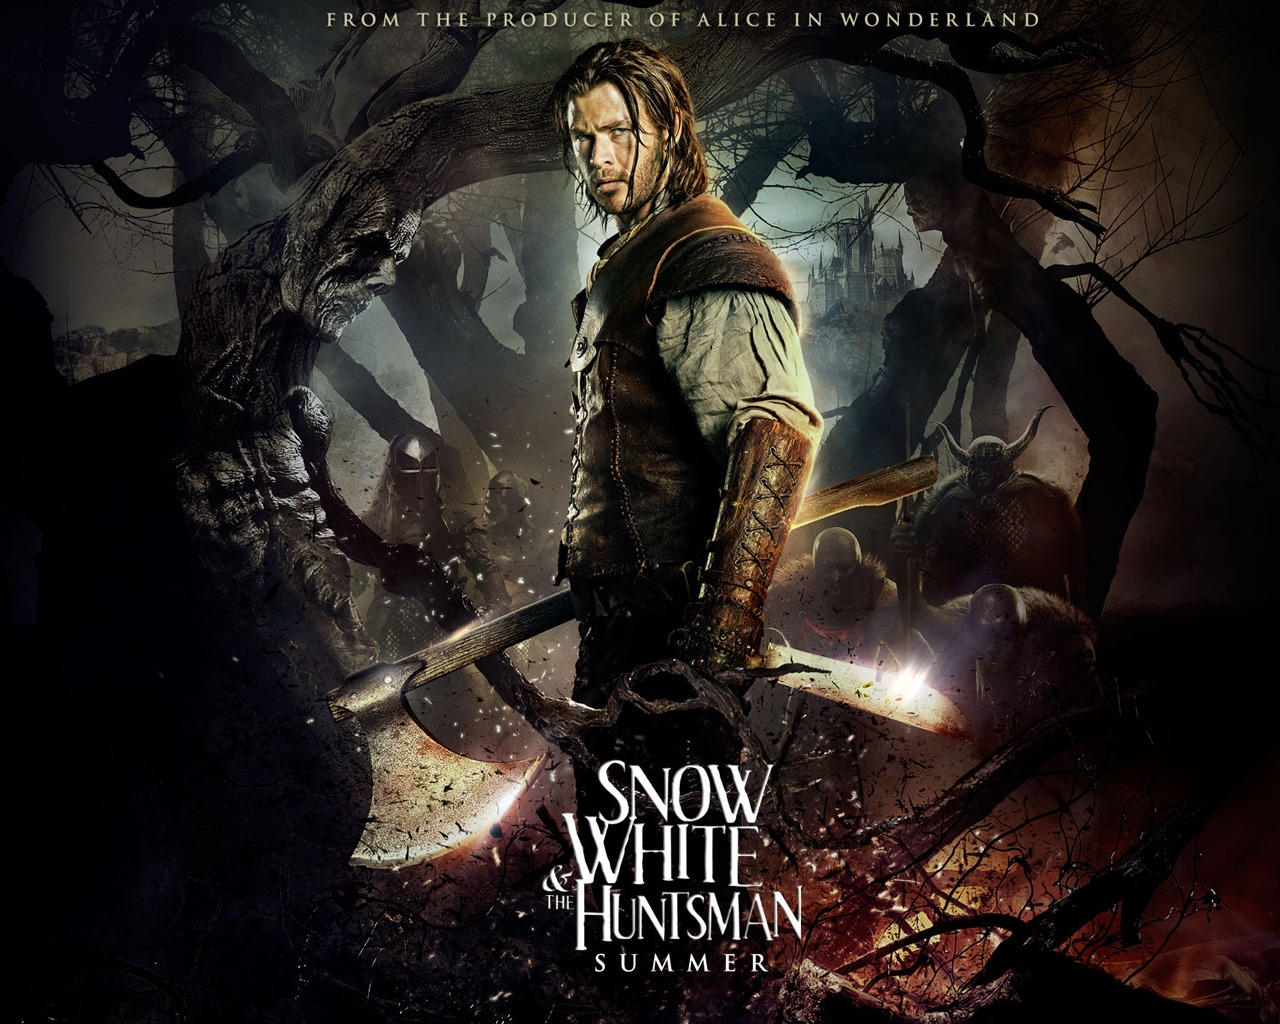 The Huntsman in Snow White Movie 2012 for 1280 x 1024 resolution